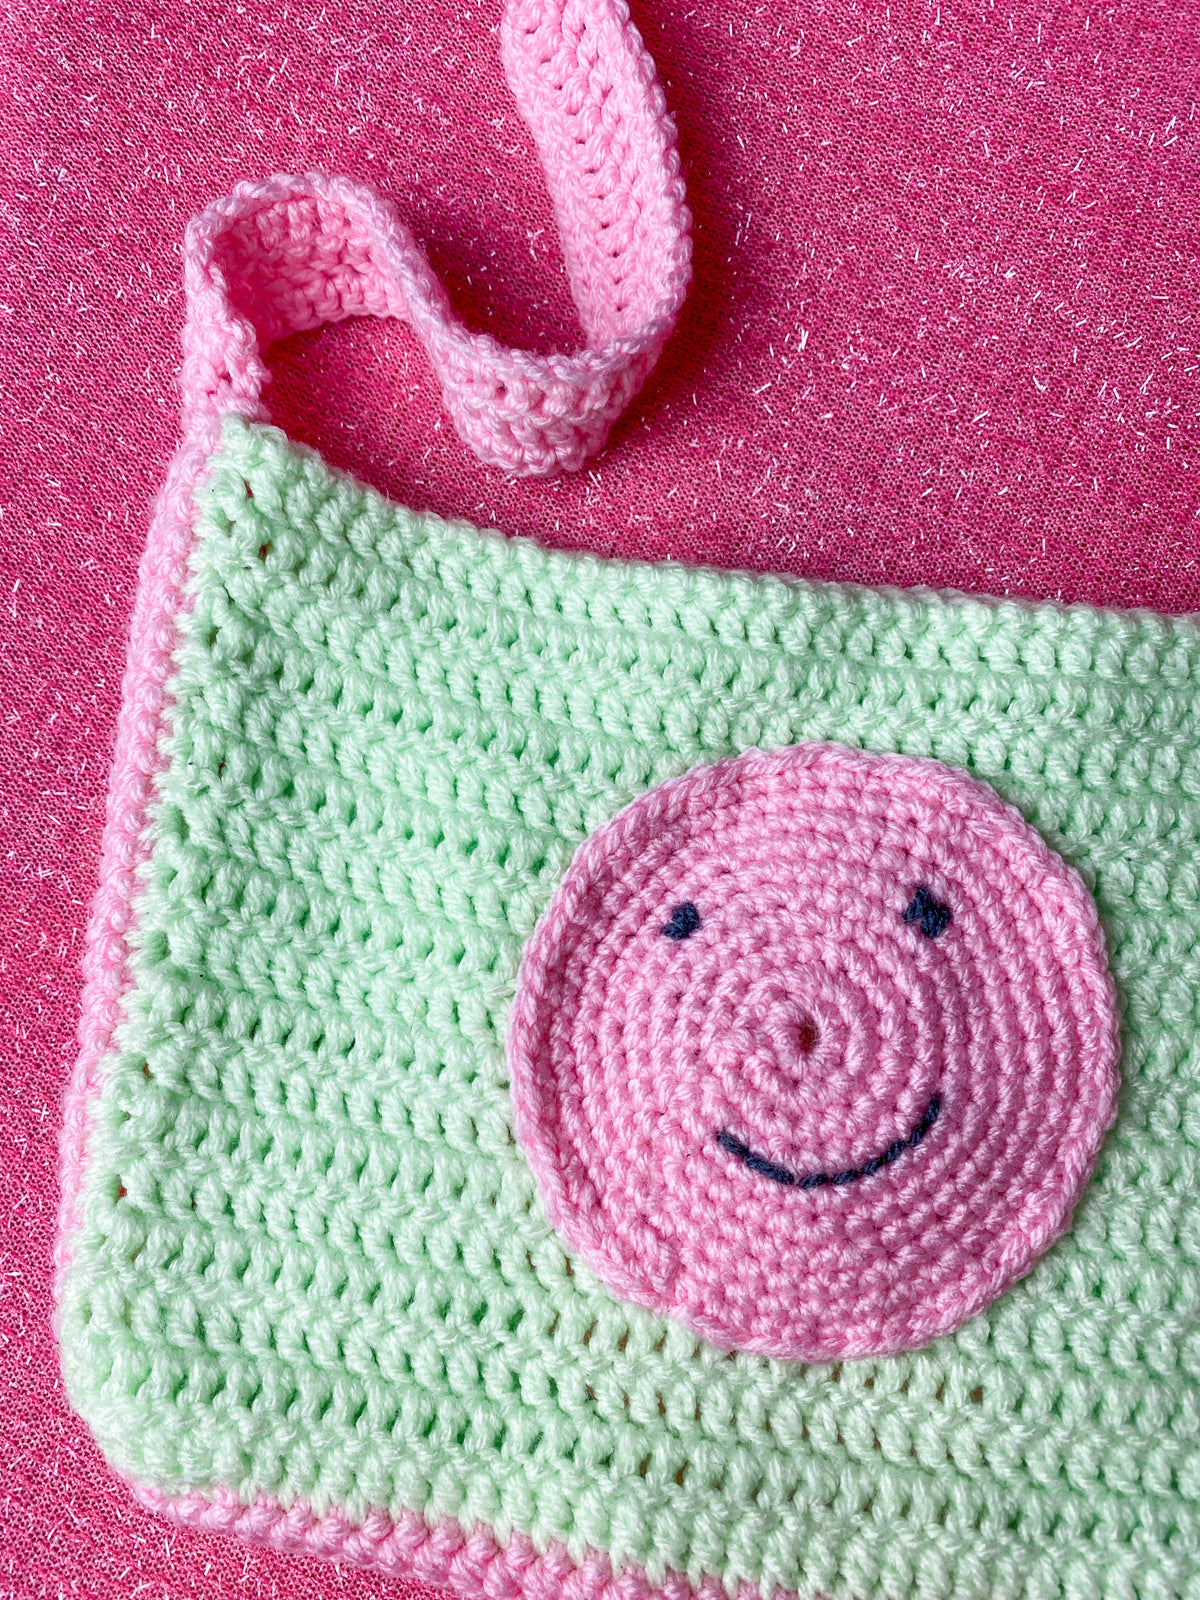 my pink and green crochet dream